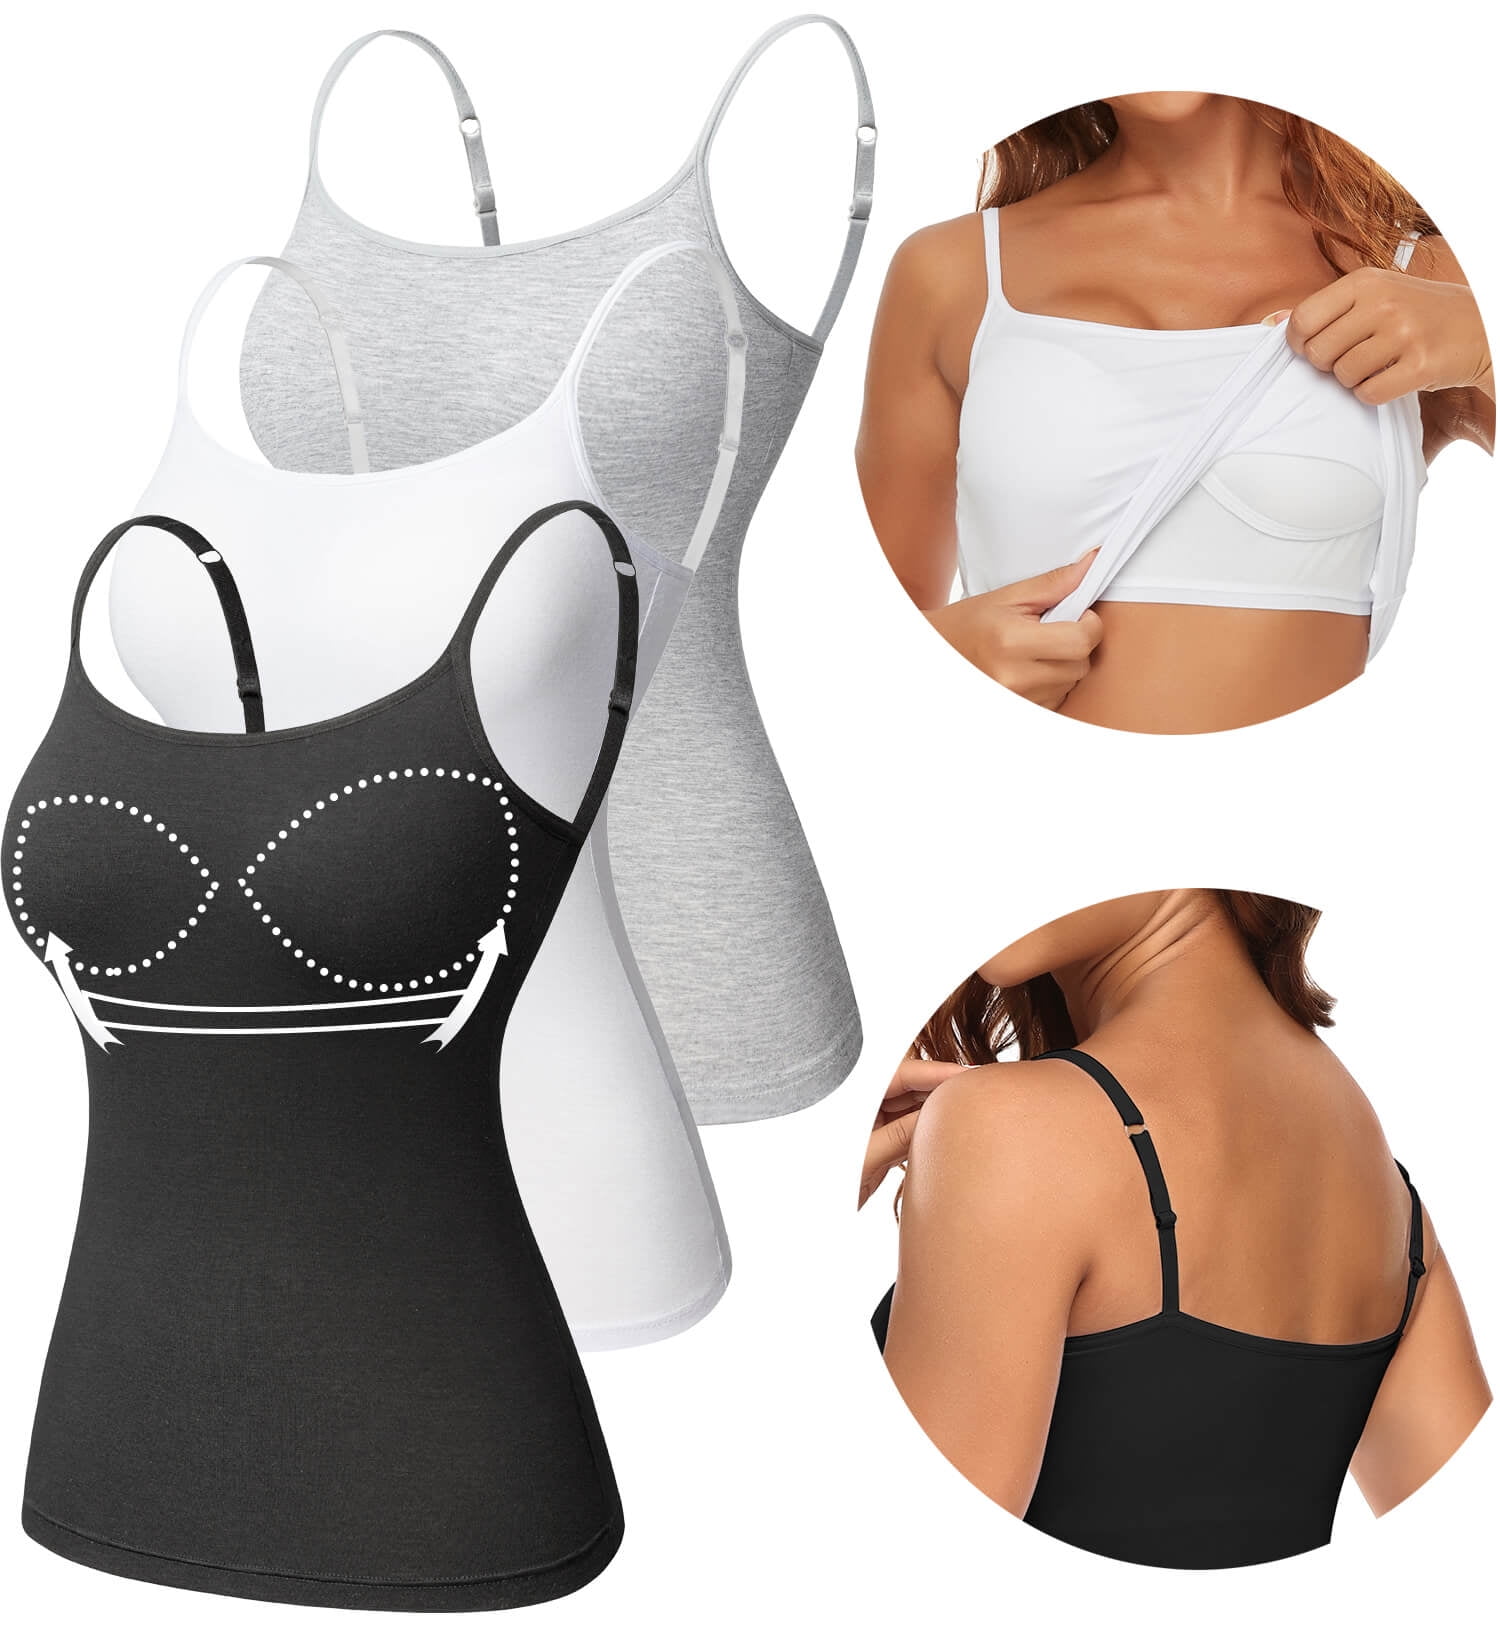 DR BEI Camisole Thick Mold Cup Built in Bra Vest Beauty Back Tank Top